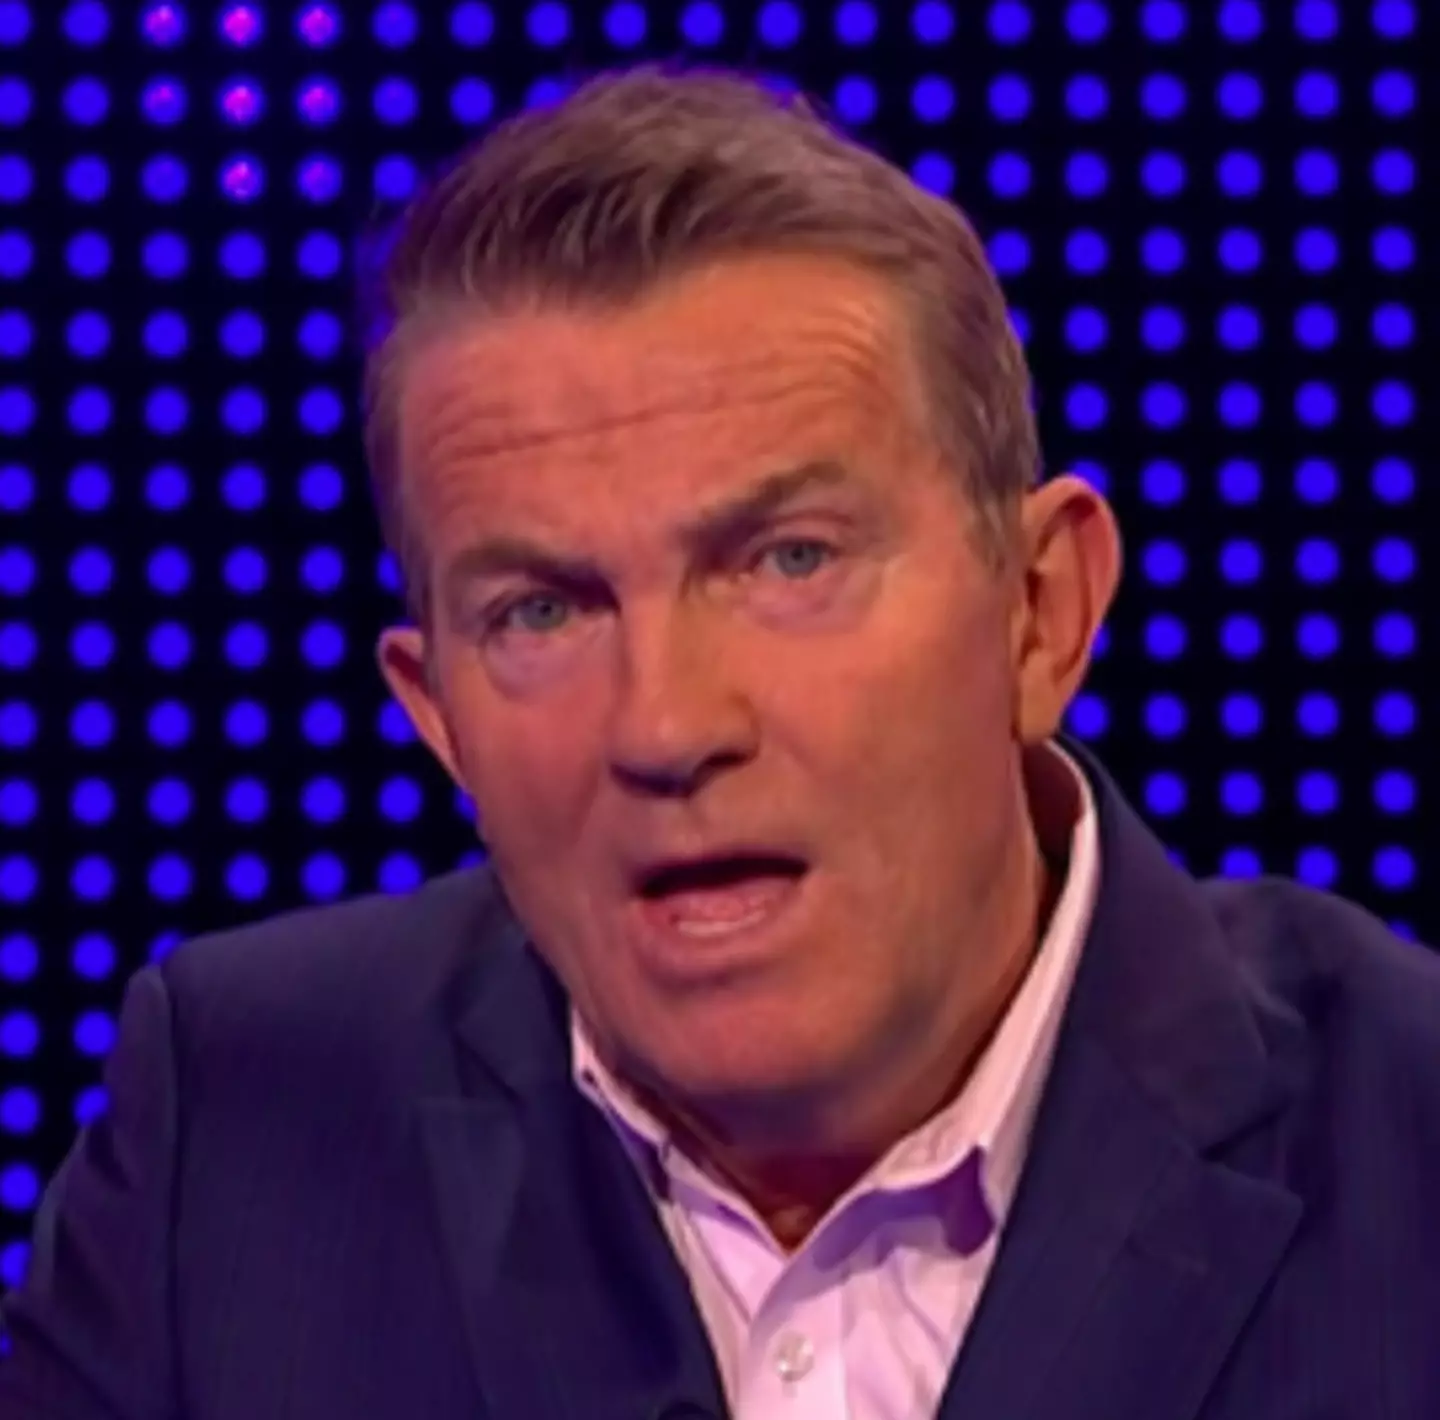 Bradley Walsh loved some of the jokes that came out of Val.